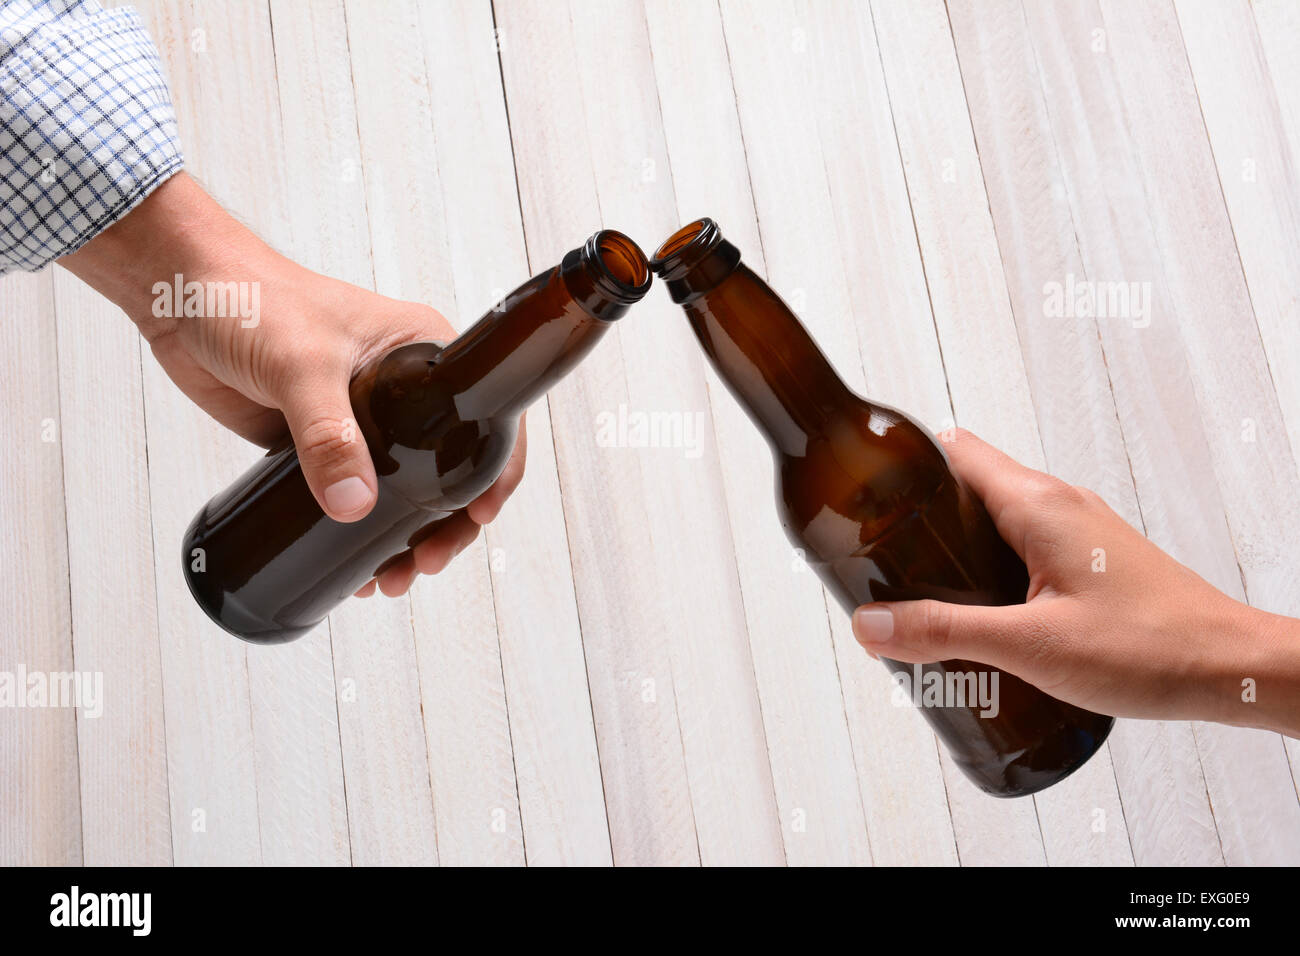 A man and a woman toasting with beer bottles. They are clinking the bottle tops over a rustic wood background. Stock Photo